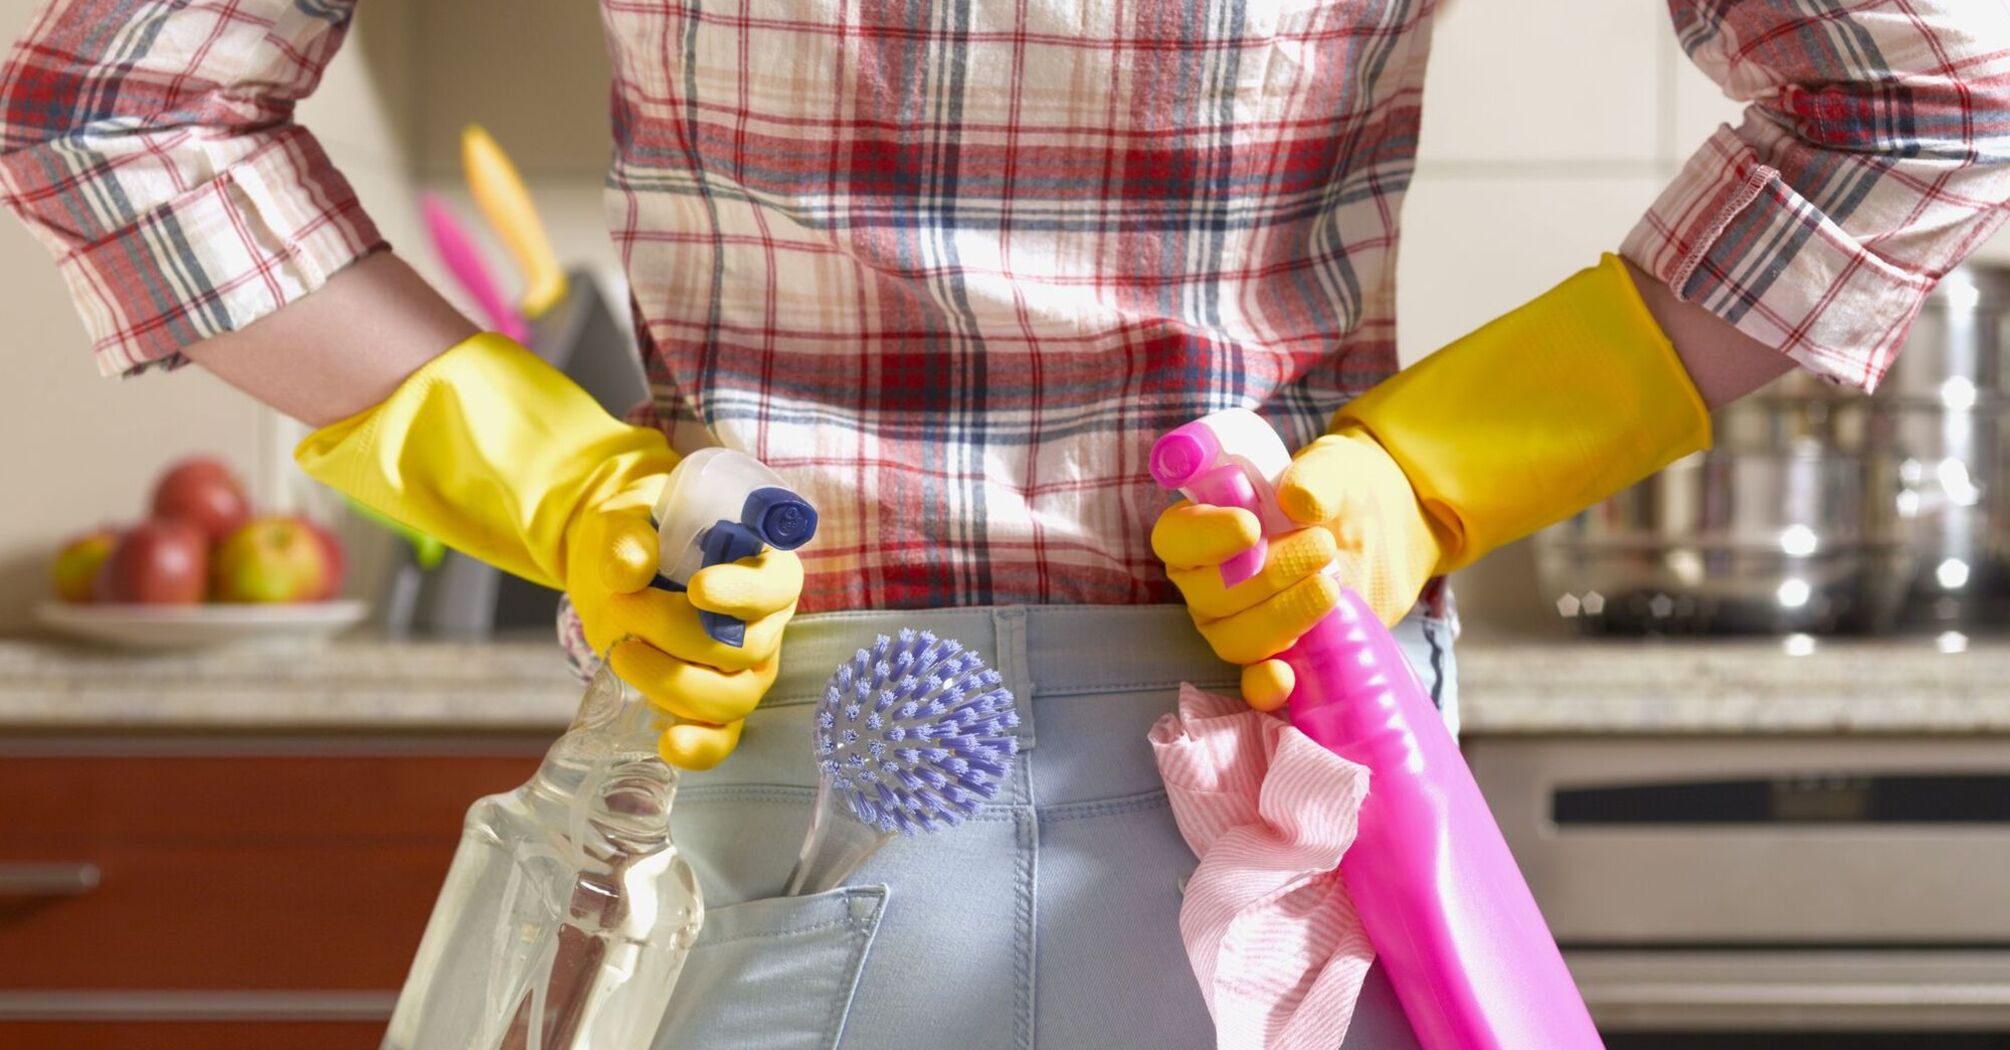 How to clean your home quickly and easily